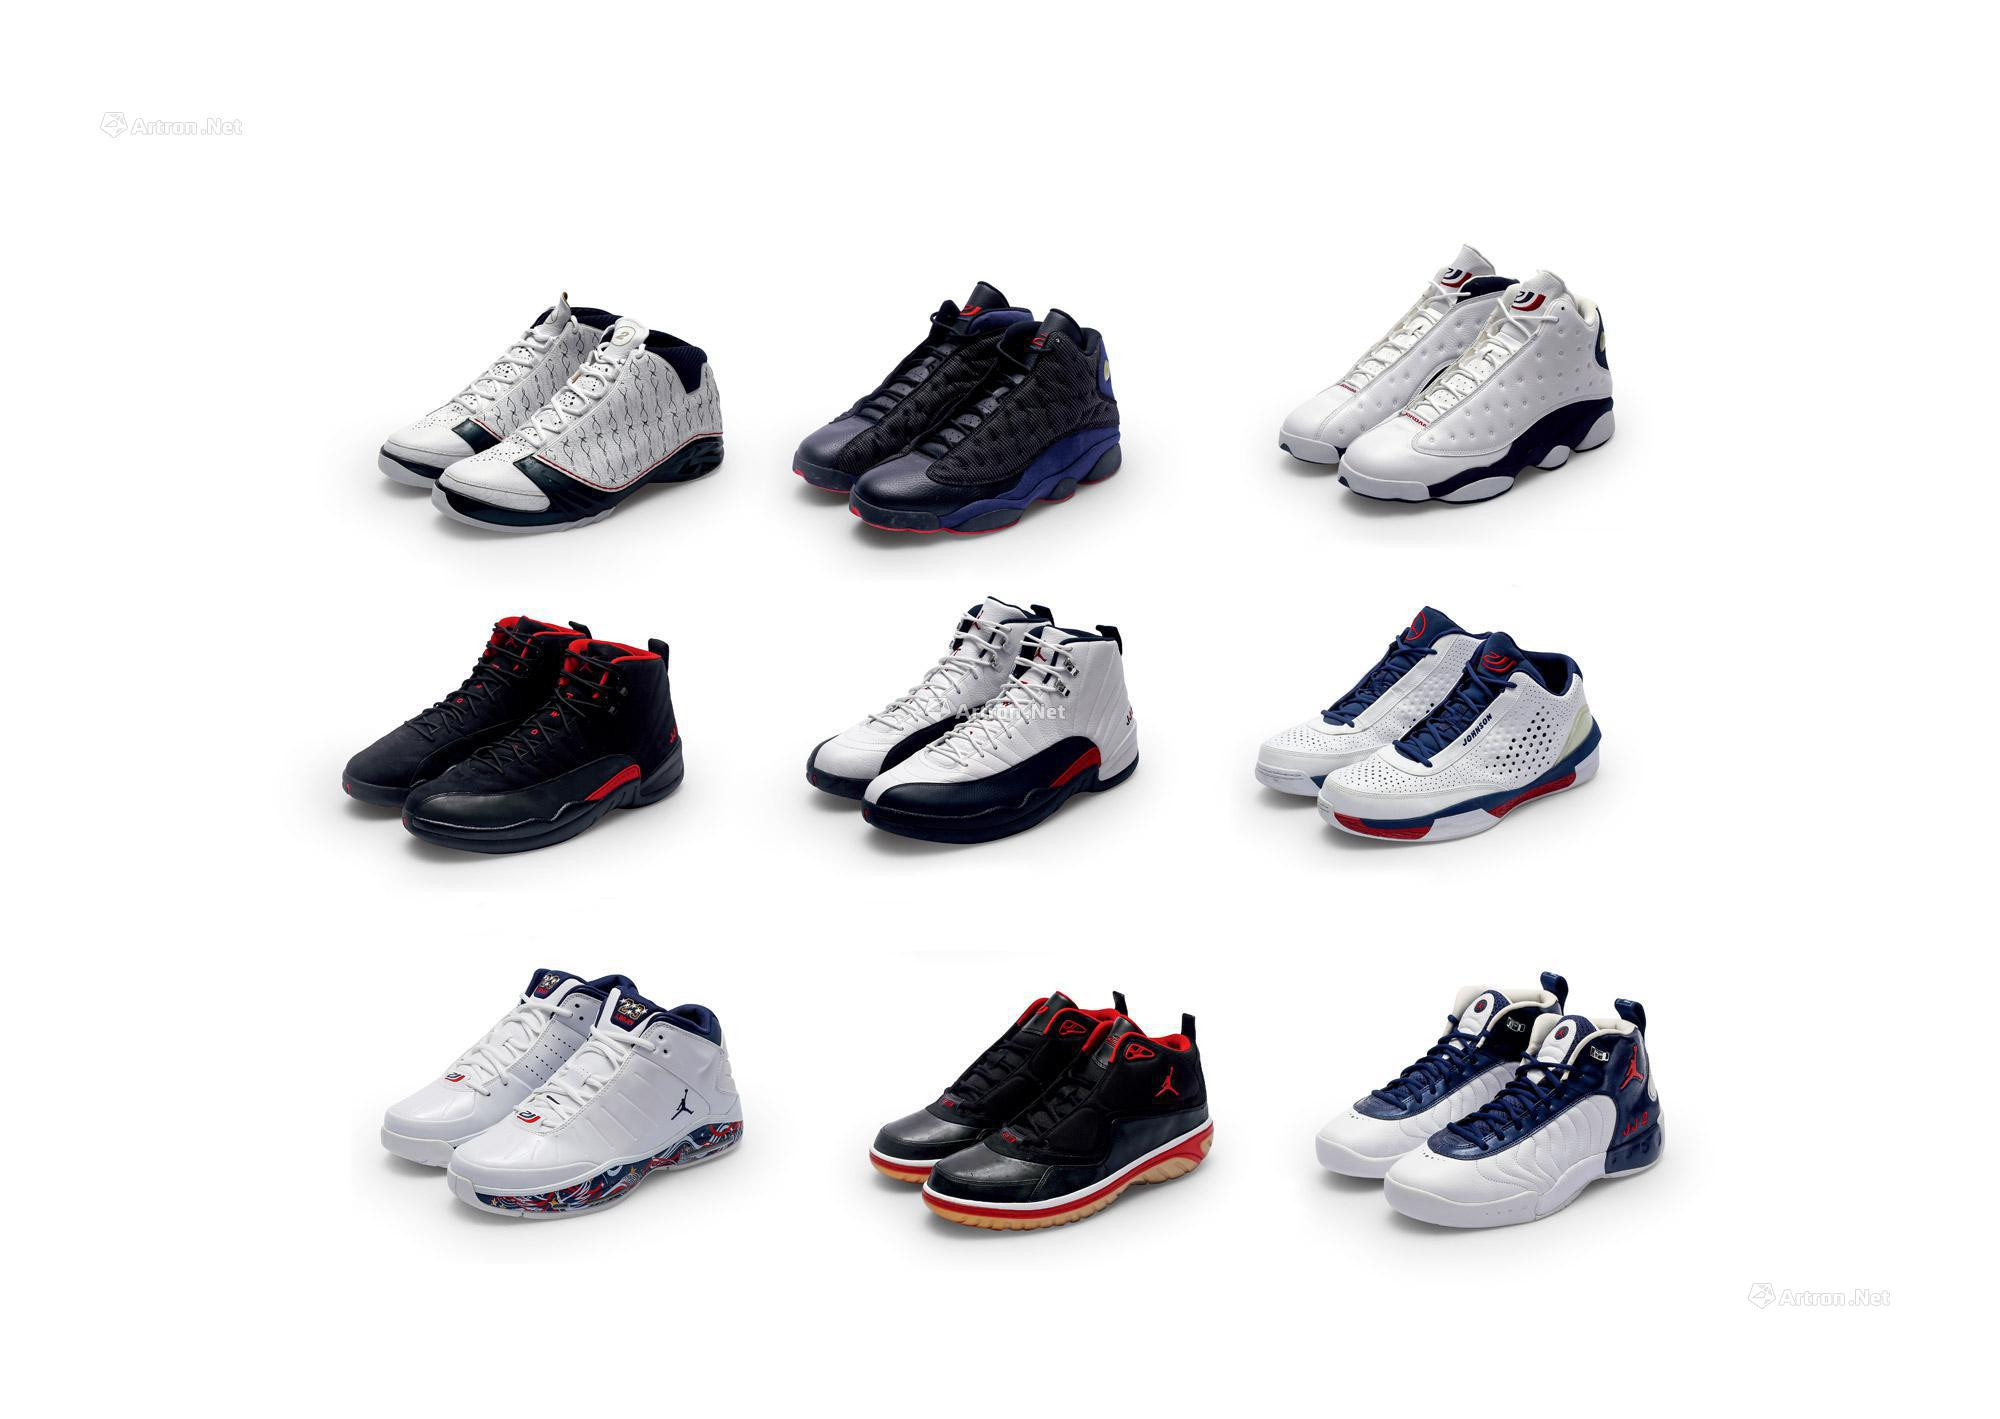 Joe Johnson Exclusive Sneaker Collection  9 Pairs of Player Exclusive Sneakers